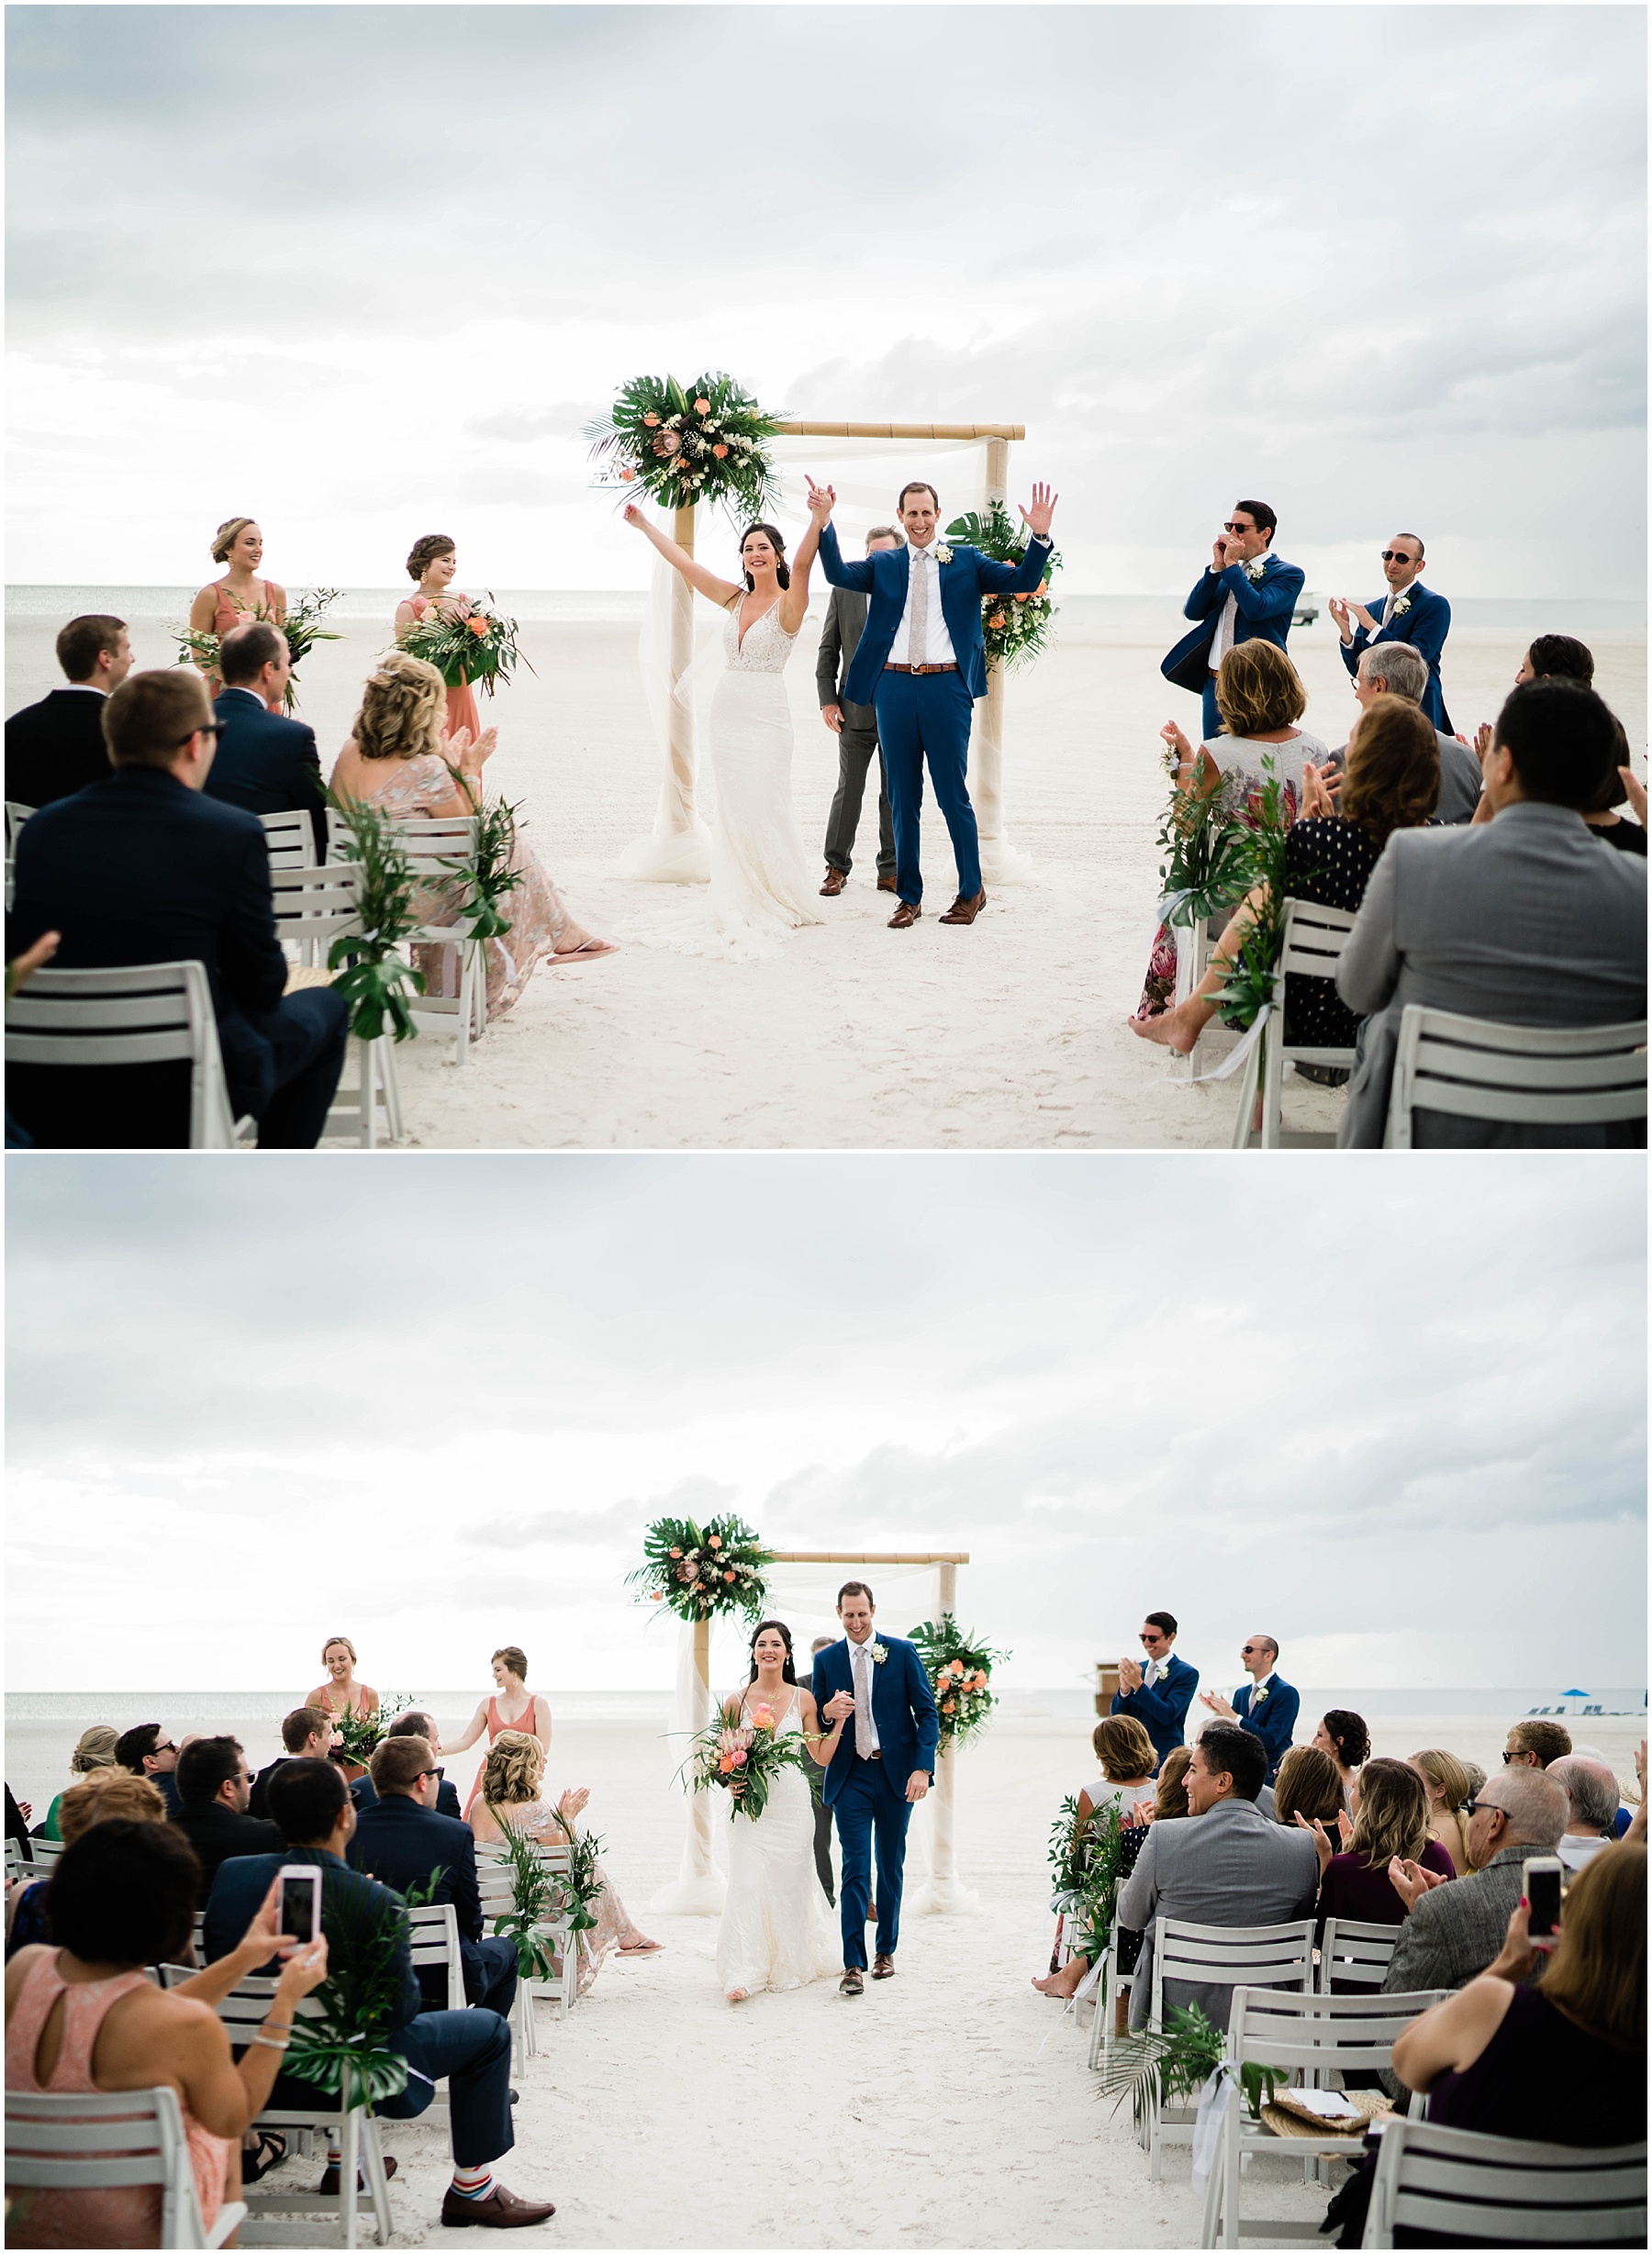 Bride and groom celebrate their marriage on the beach on wedding day at JW Marriott Marco Island in Florida.